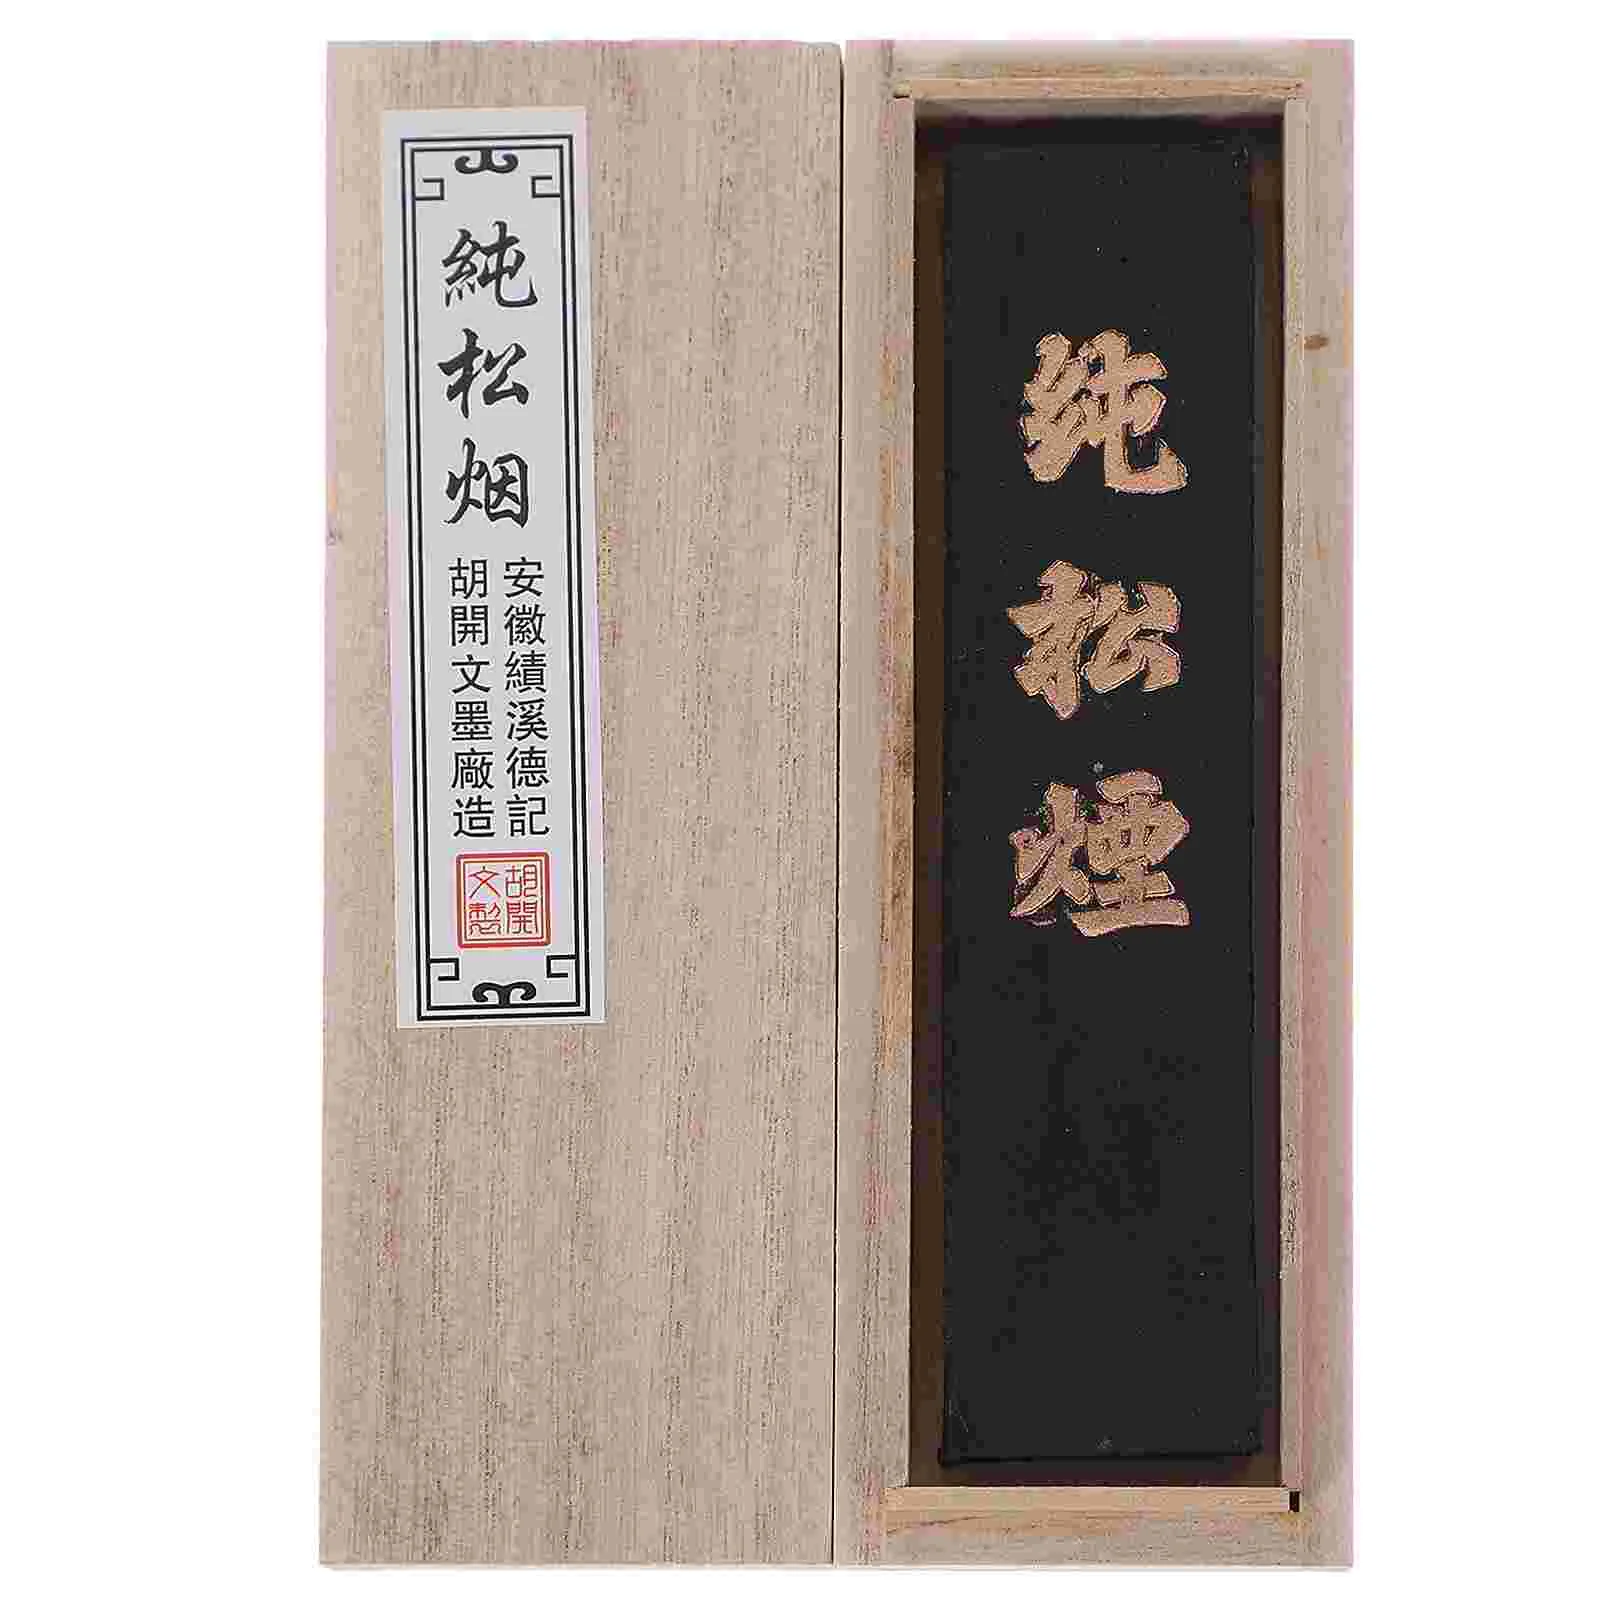 

Ink Stick Traditional Strip Unique Calligraphy Chinese Painting Tool Practical Grinding Supply Japanese Plushies